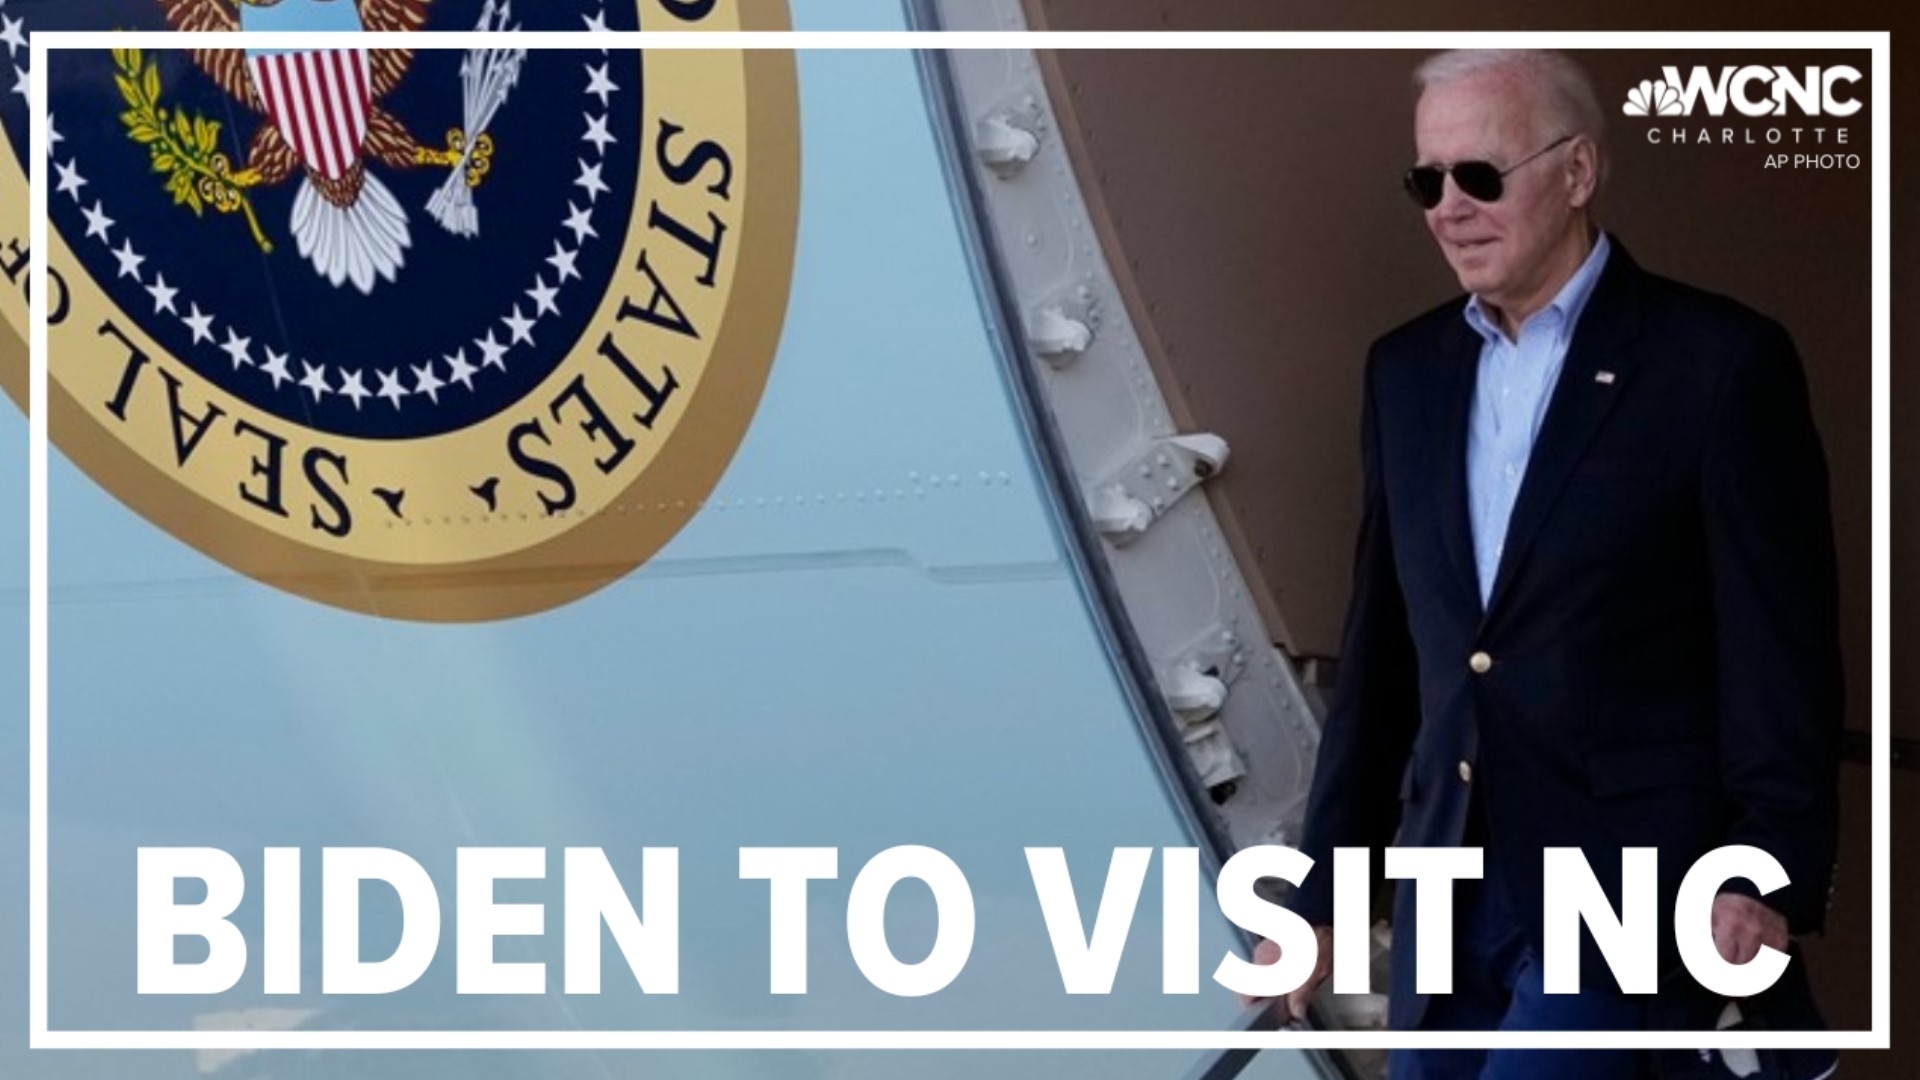 President Joe Biden and first lady Jill Biden will celebrate "Friendsgiving" with servicemembers and military families at Marine Corps Air Station Cherry Point.